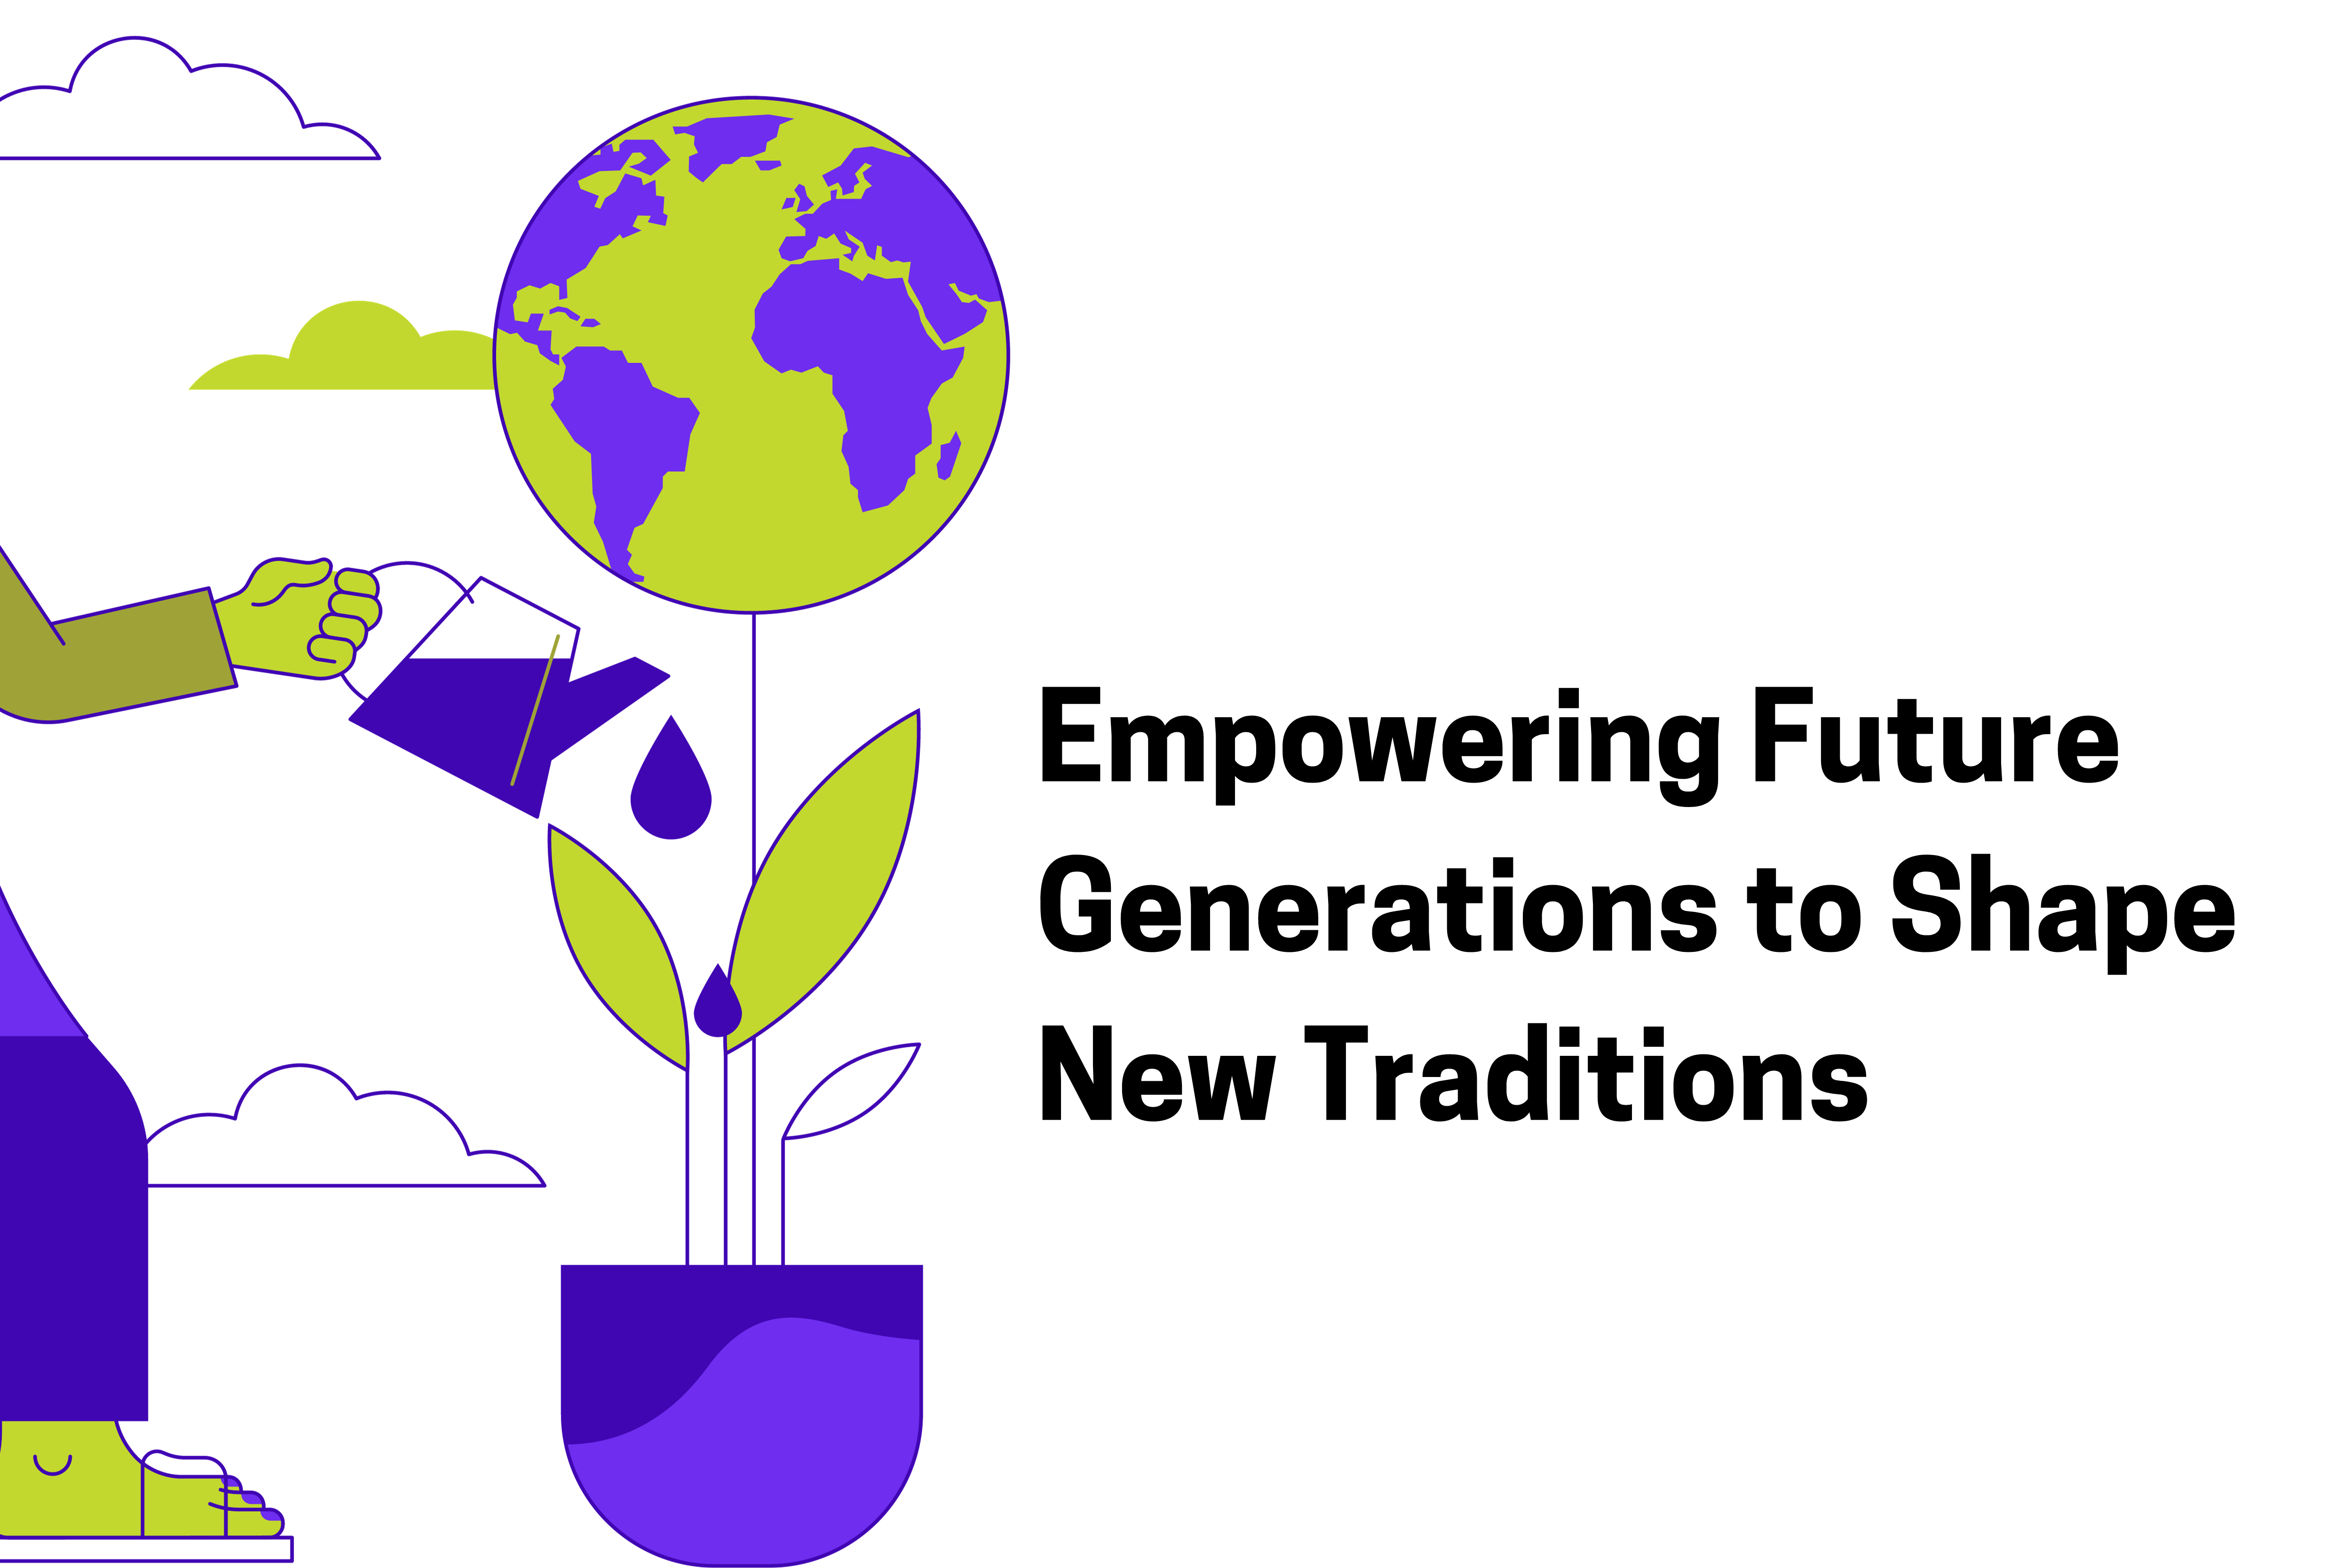 Empowering Future Generations to Shape New Traditions; Image shows a watering can pouring water on a potted plant that blooms into the planet Earth